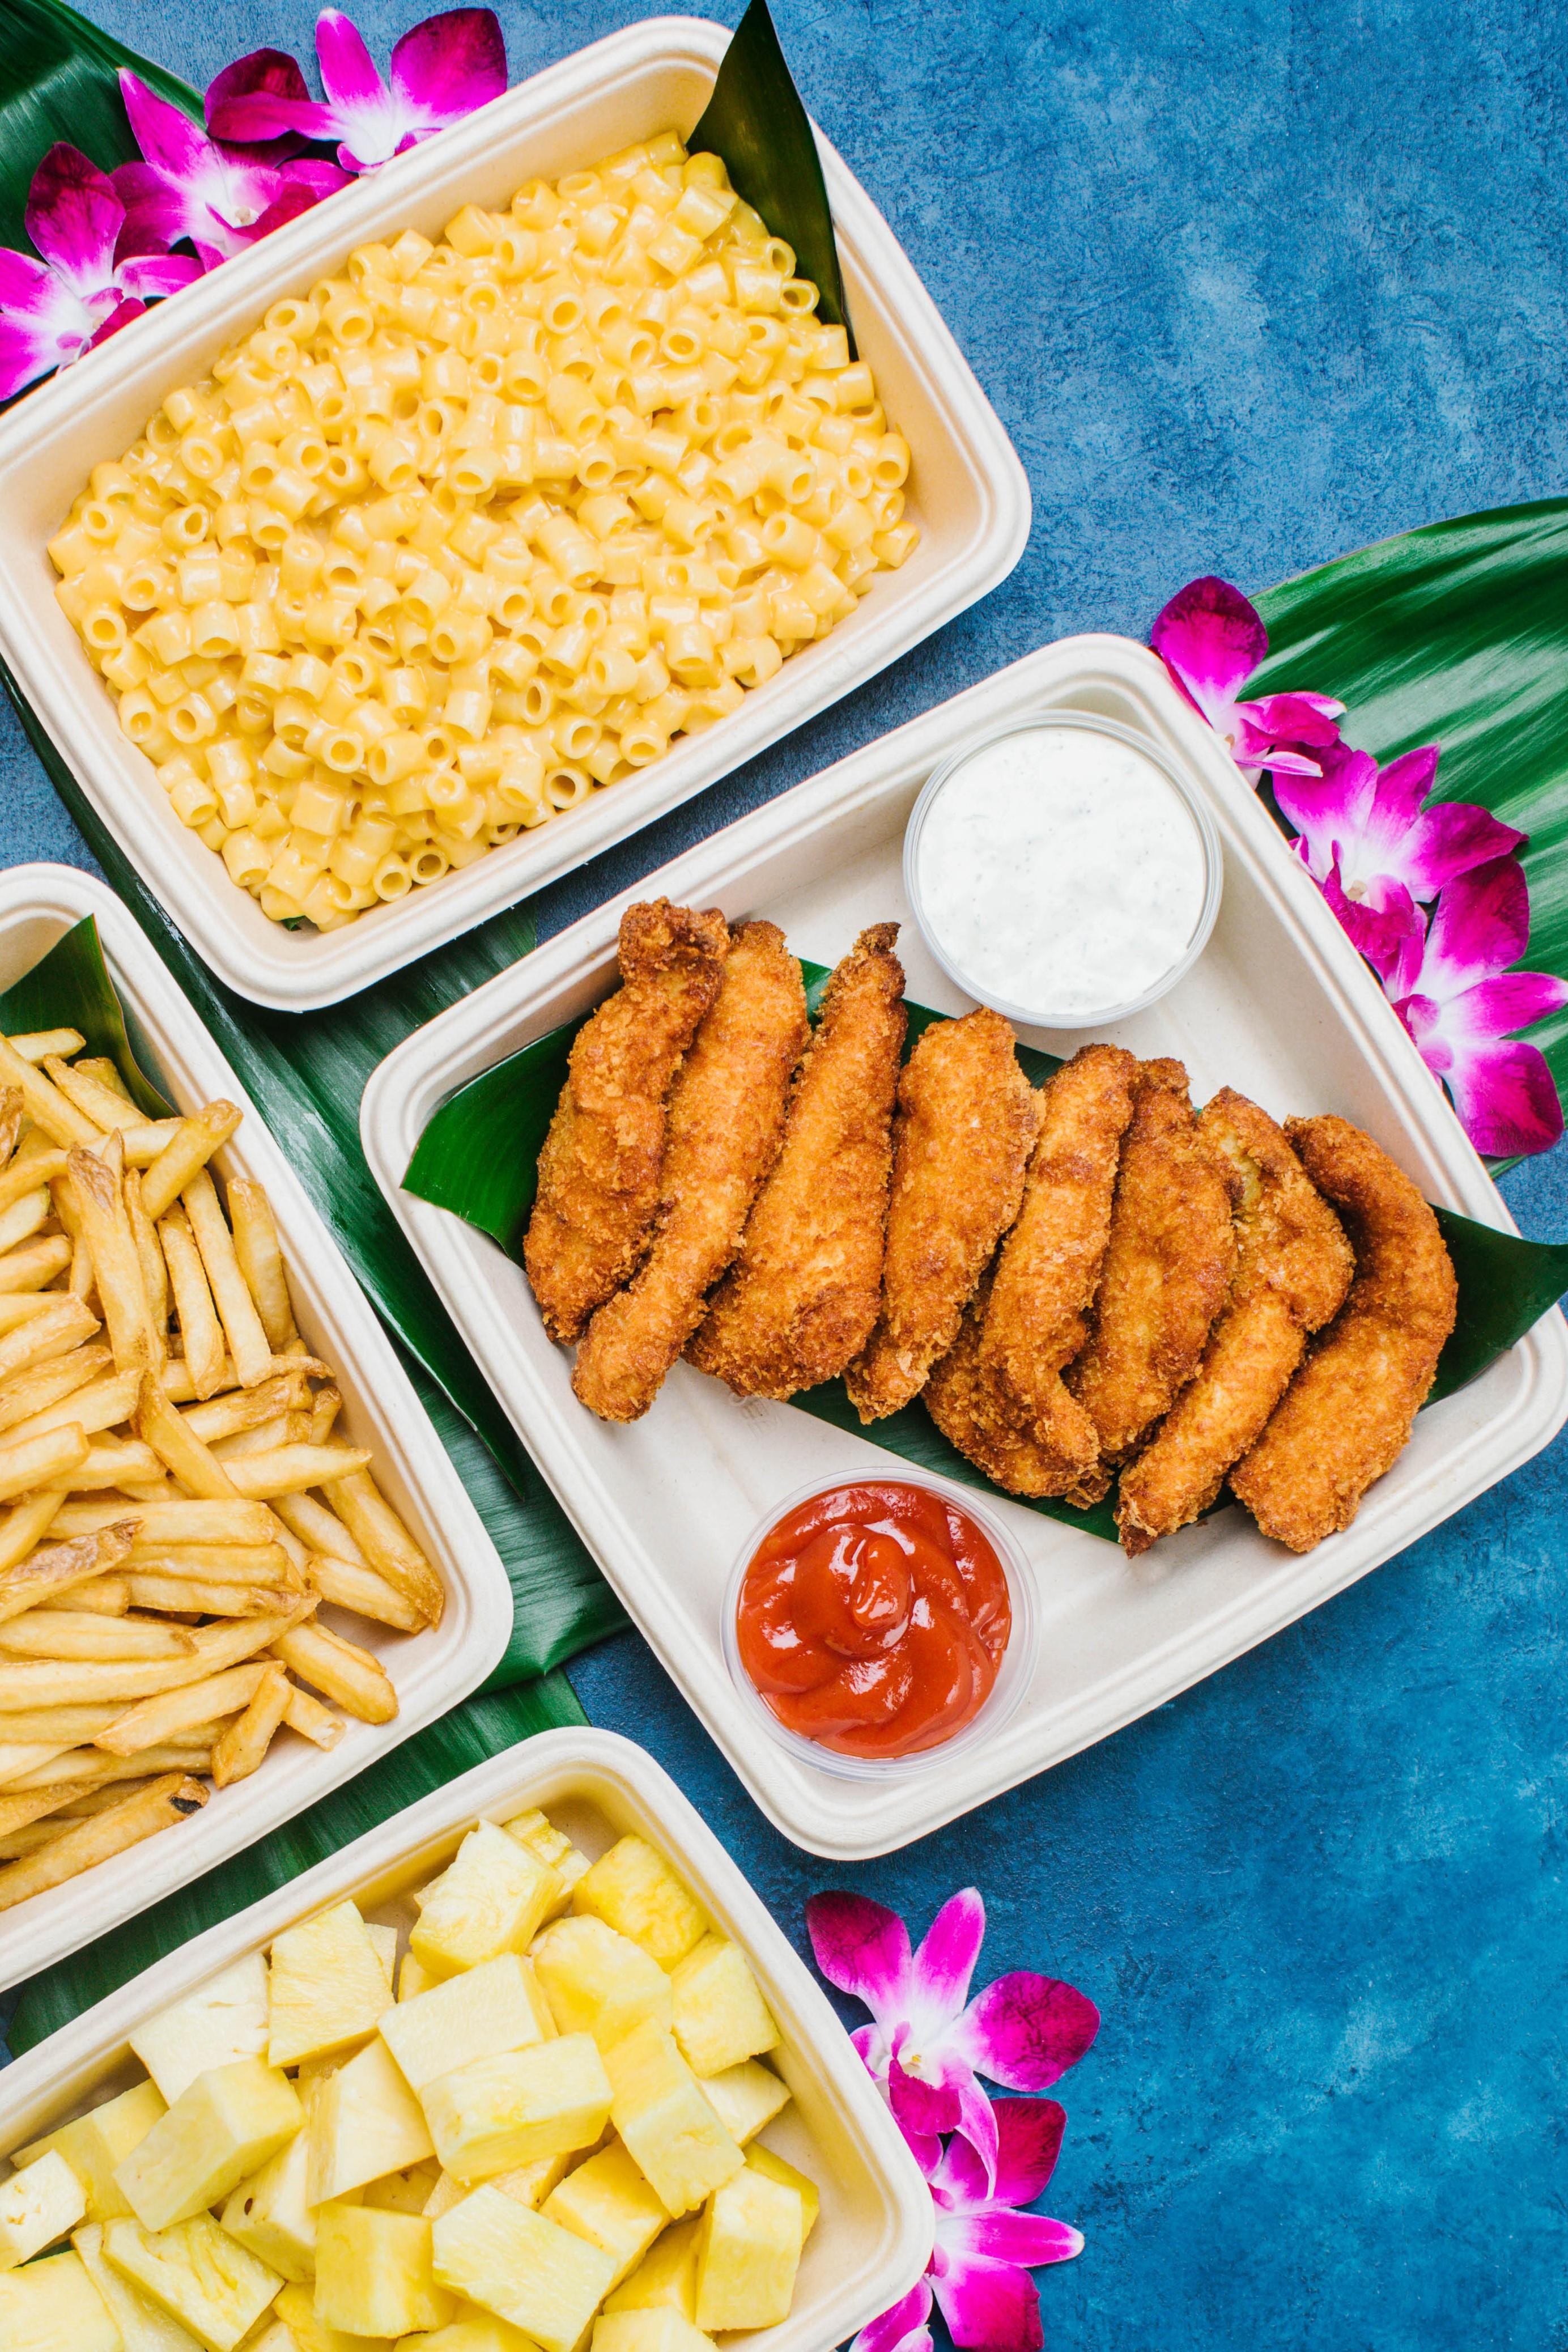 Fried chicken strips with mac & cheese, fries and fruit